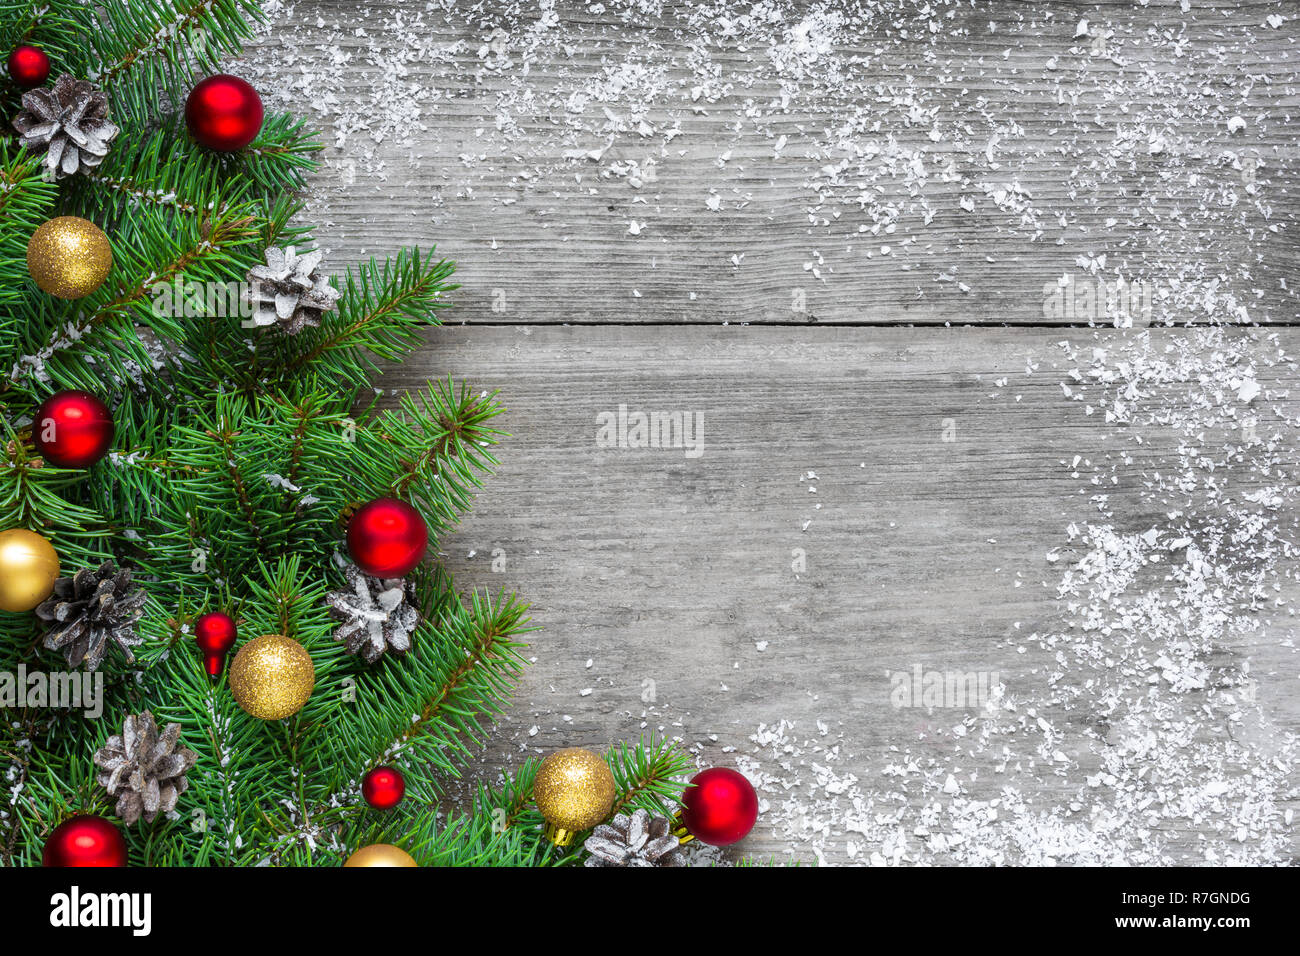 Christmas background with fir tree branches, red and golden decorations and pine cones on rustic wooden table covered with snow. Flat lay. top view wi Stock Photo